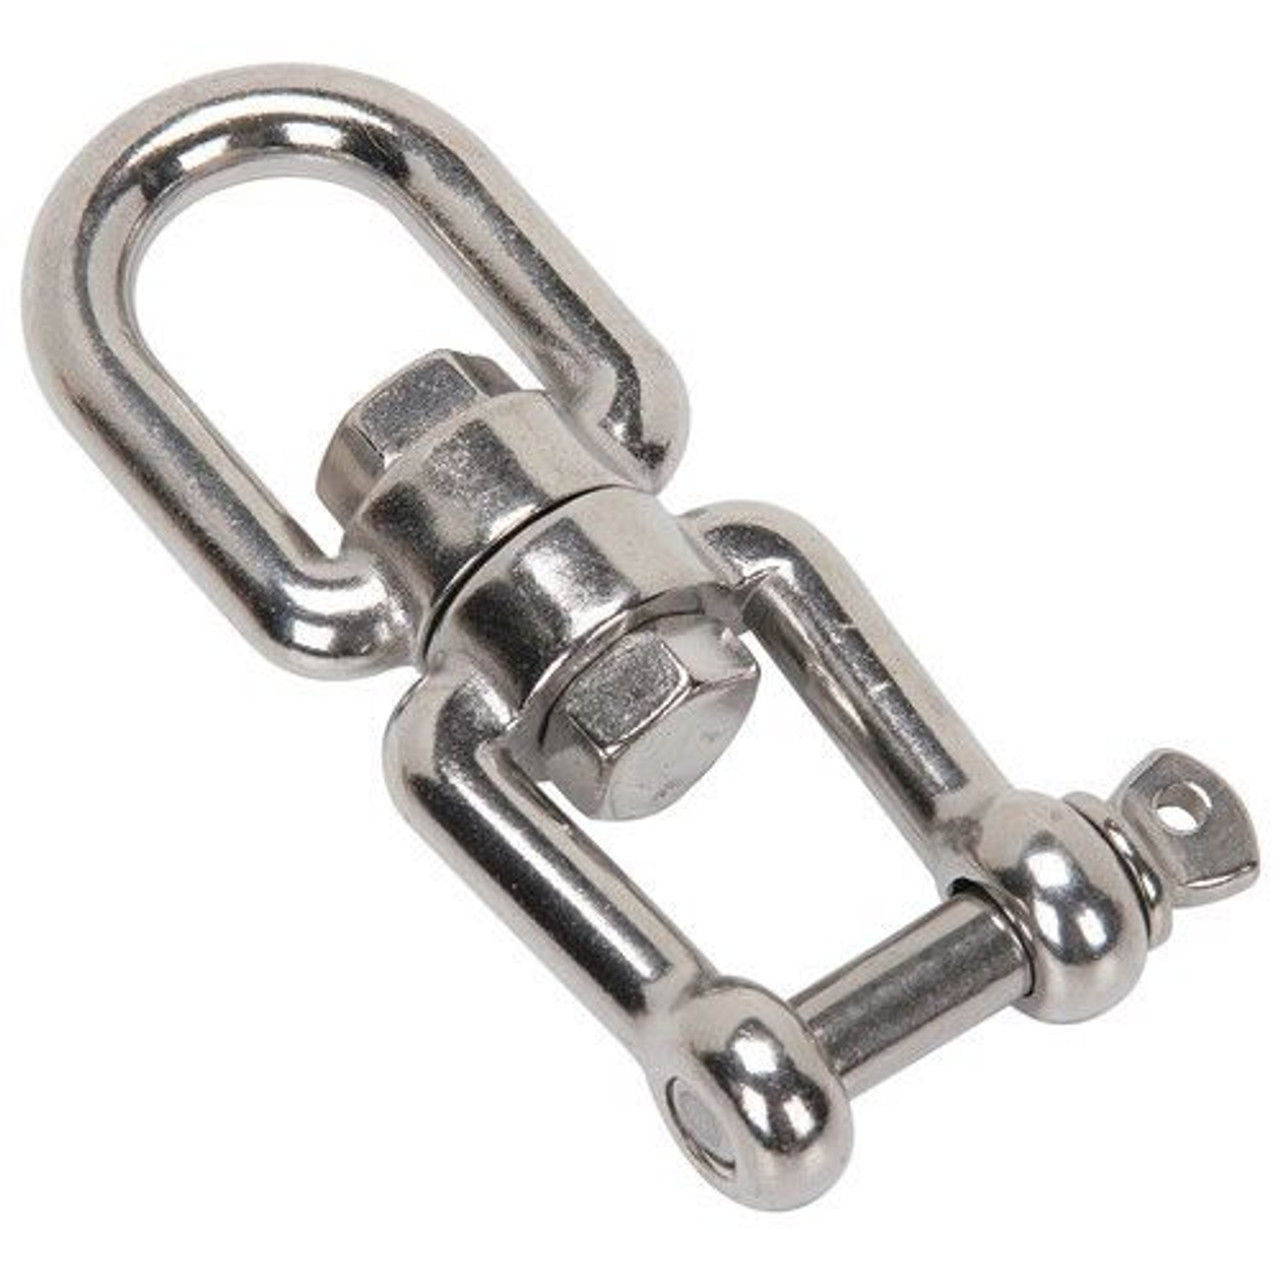 US STAINLESS Stainless Steel 316 Anchor Swivel Eye and Eye 10mm or 3/8  Marine Grade